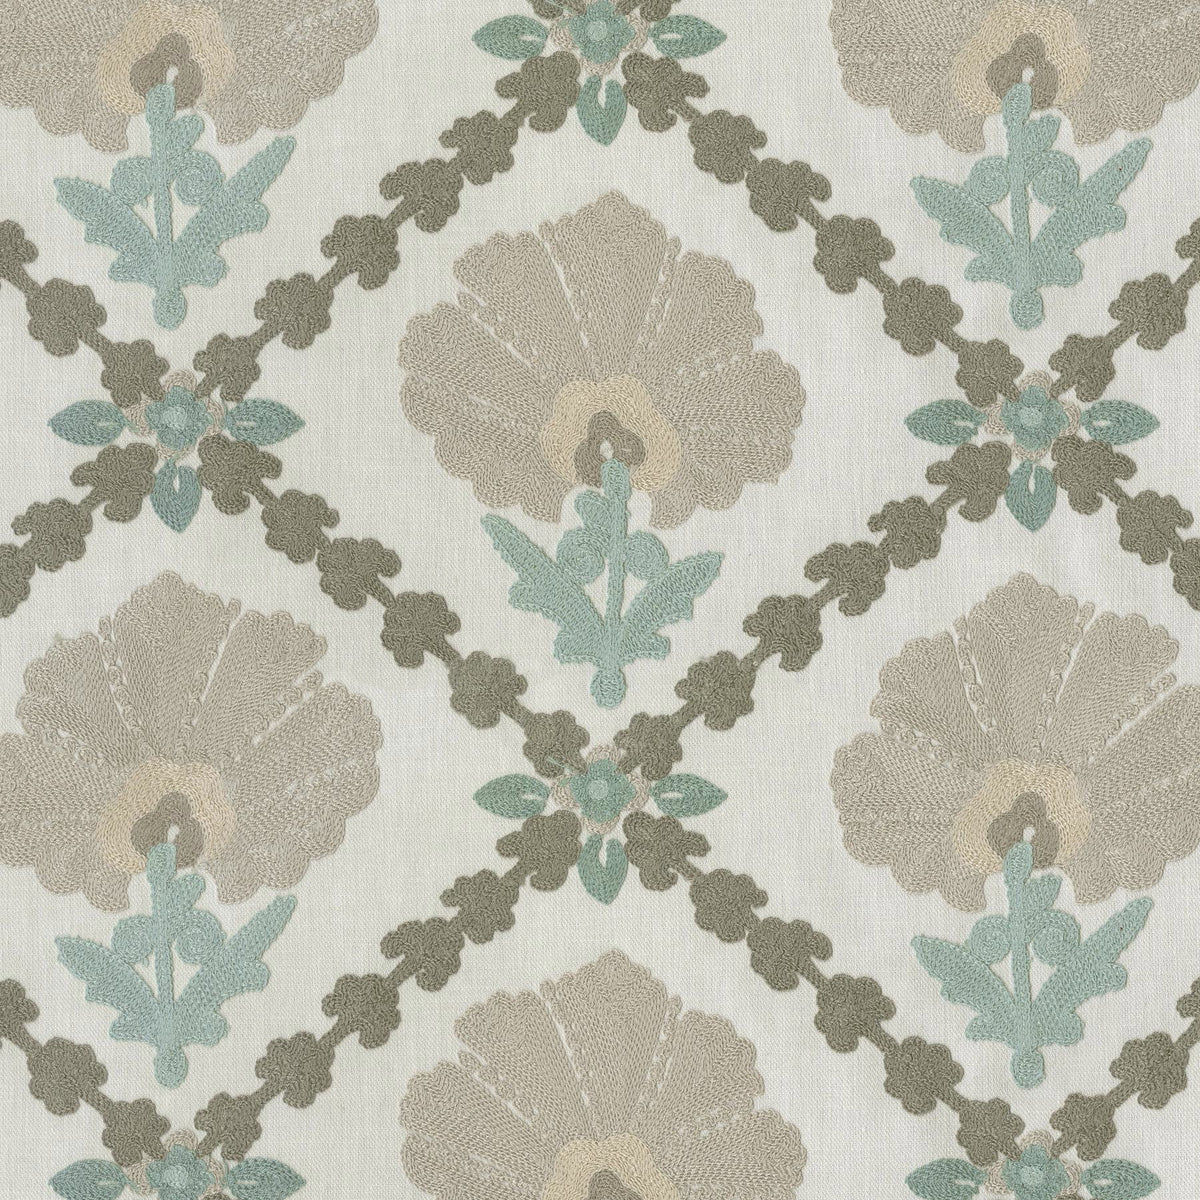 P/K Lifestyles Grand Fleur Embroidery - Mist 411402 Upholstery Fabric